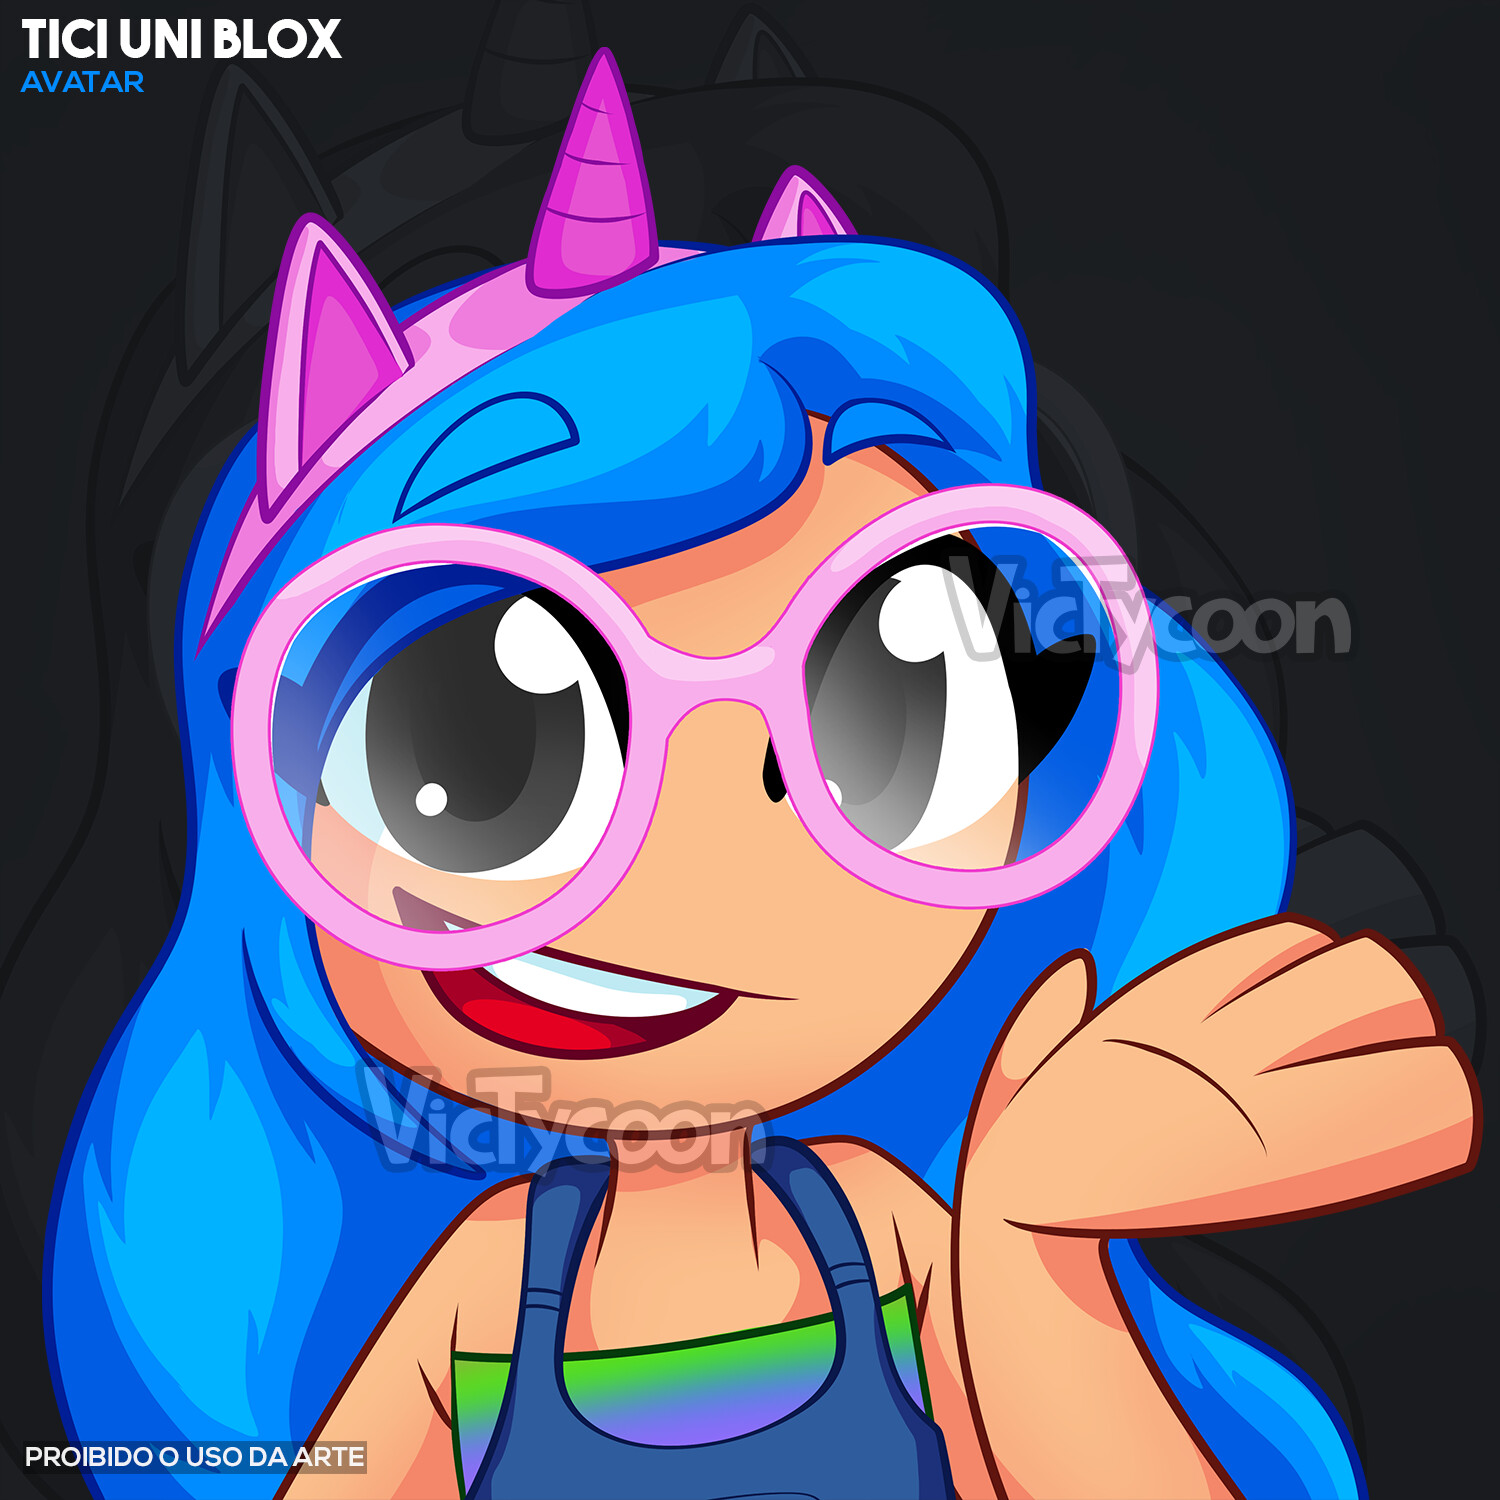 FOTO PERFIL - Lilly Blox (Canal Infantil Roblox) by VicTycoon on